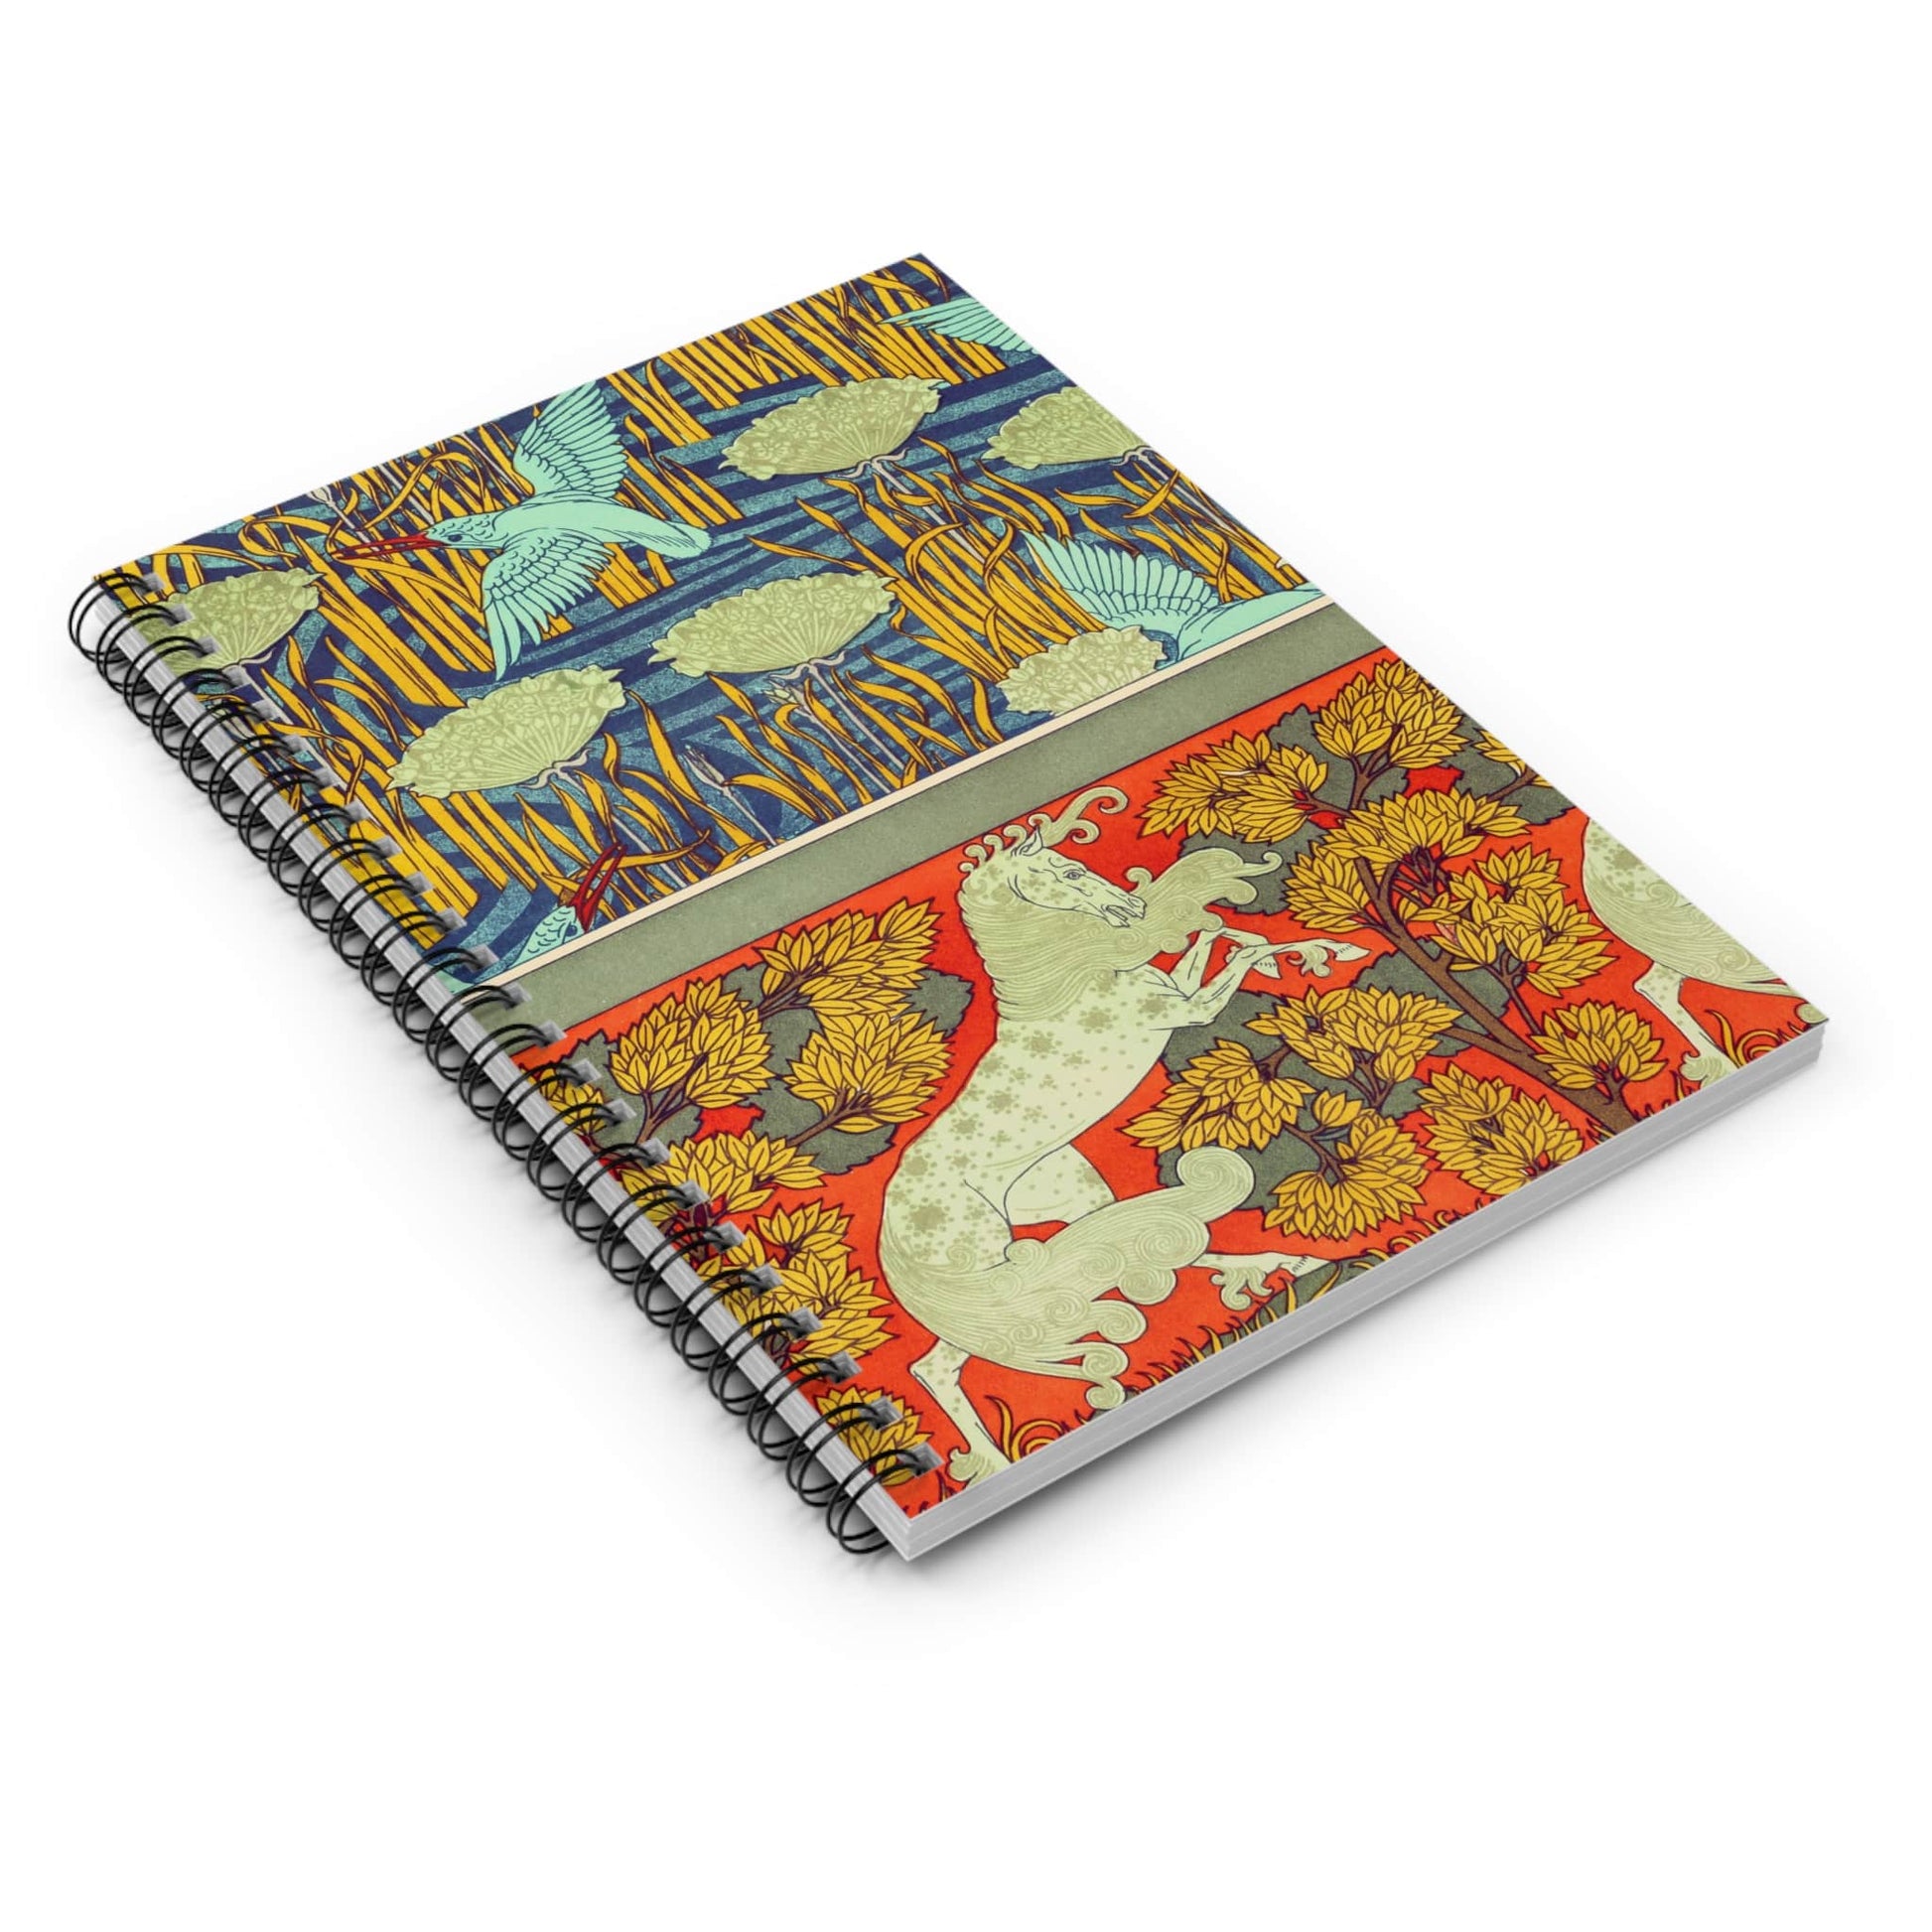 Art Nouveau Spiral Notebook Laying Flat on White Surface